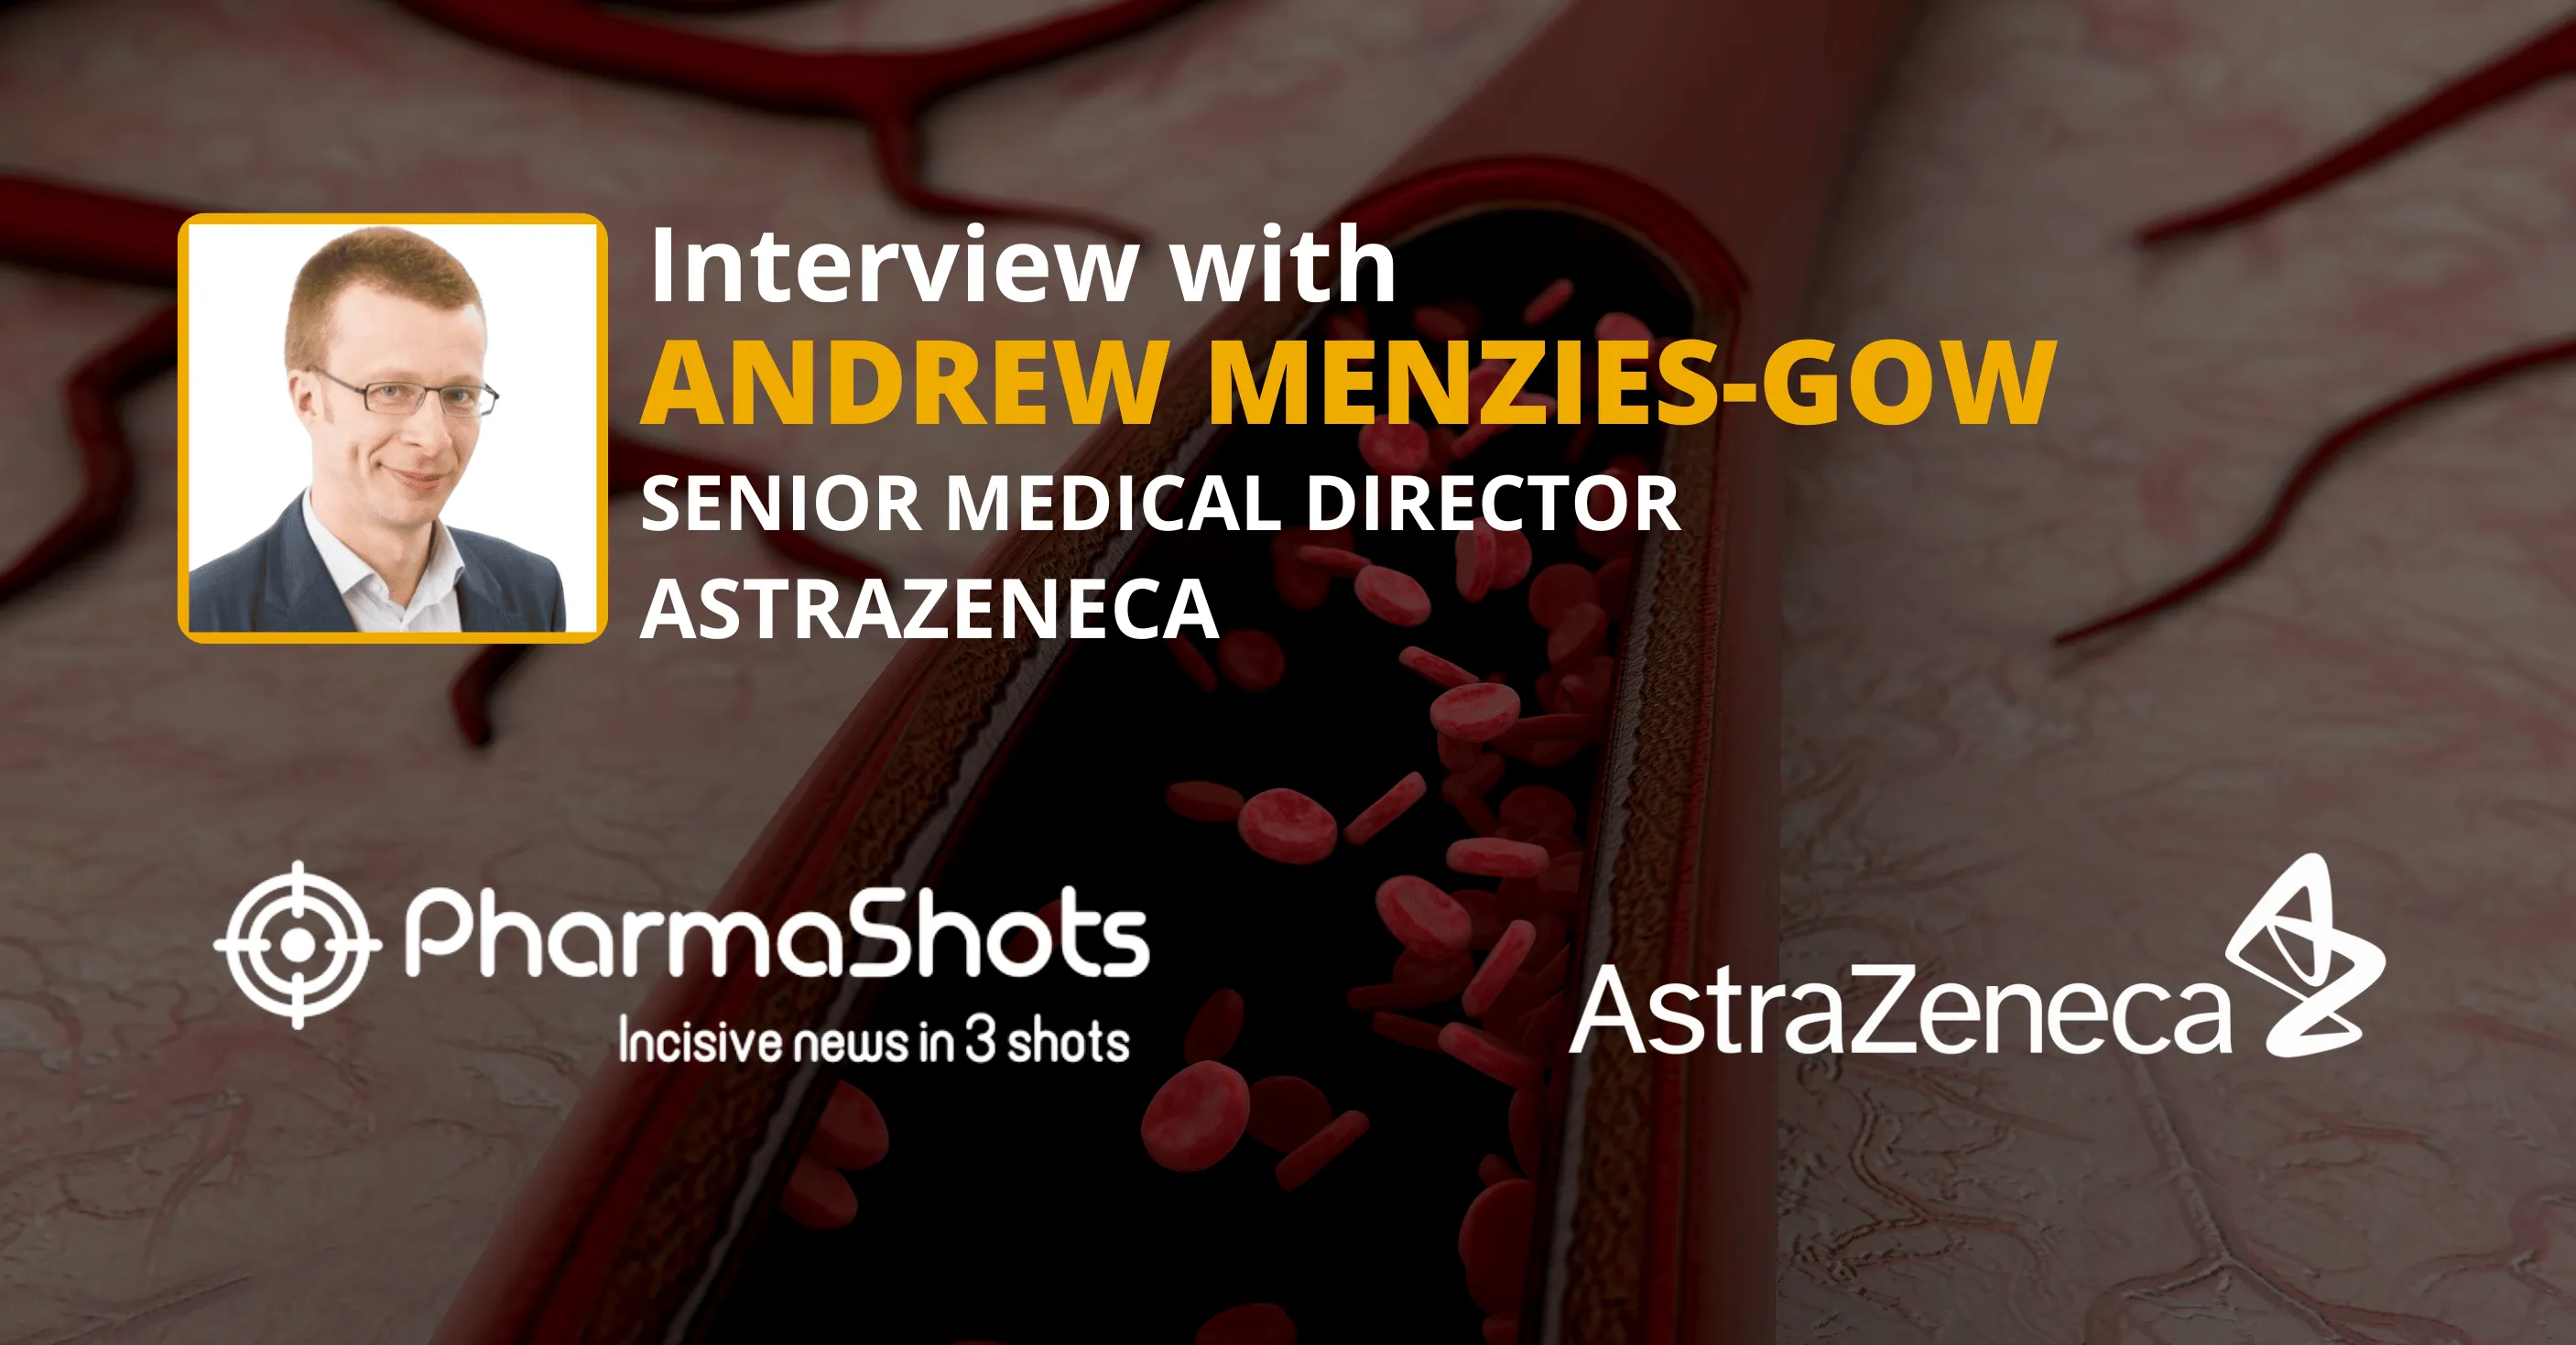 AstraZeneca at ATS’24: Andrew Menzies-Gow from AstraZeneca in a Stimulating Conversation with PharmaShots